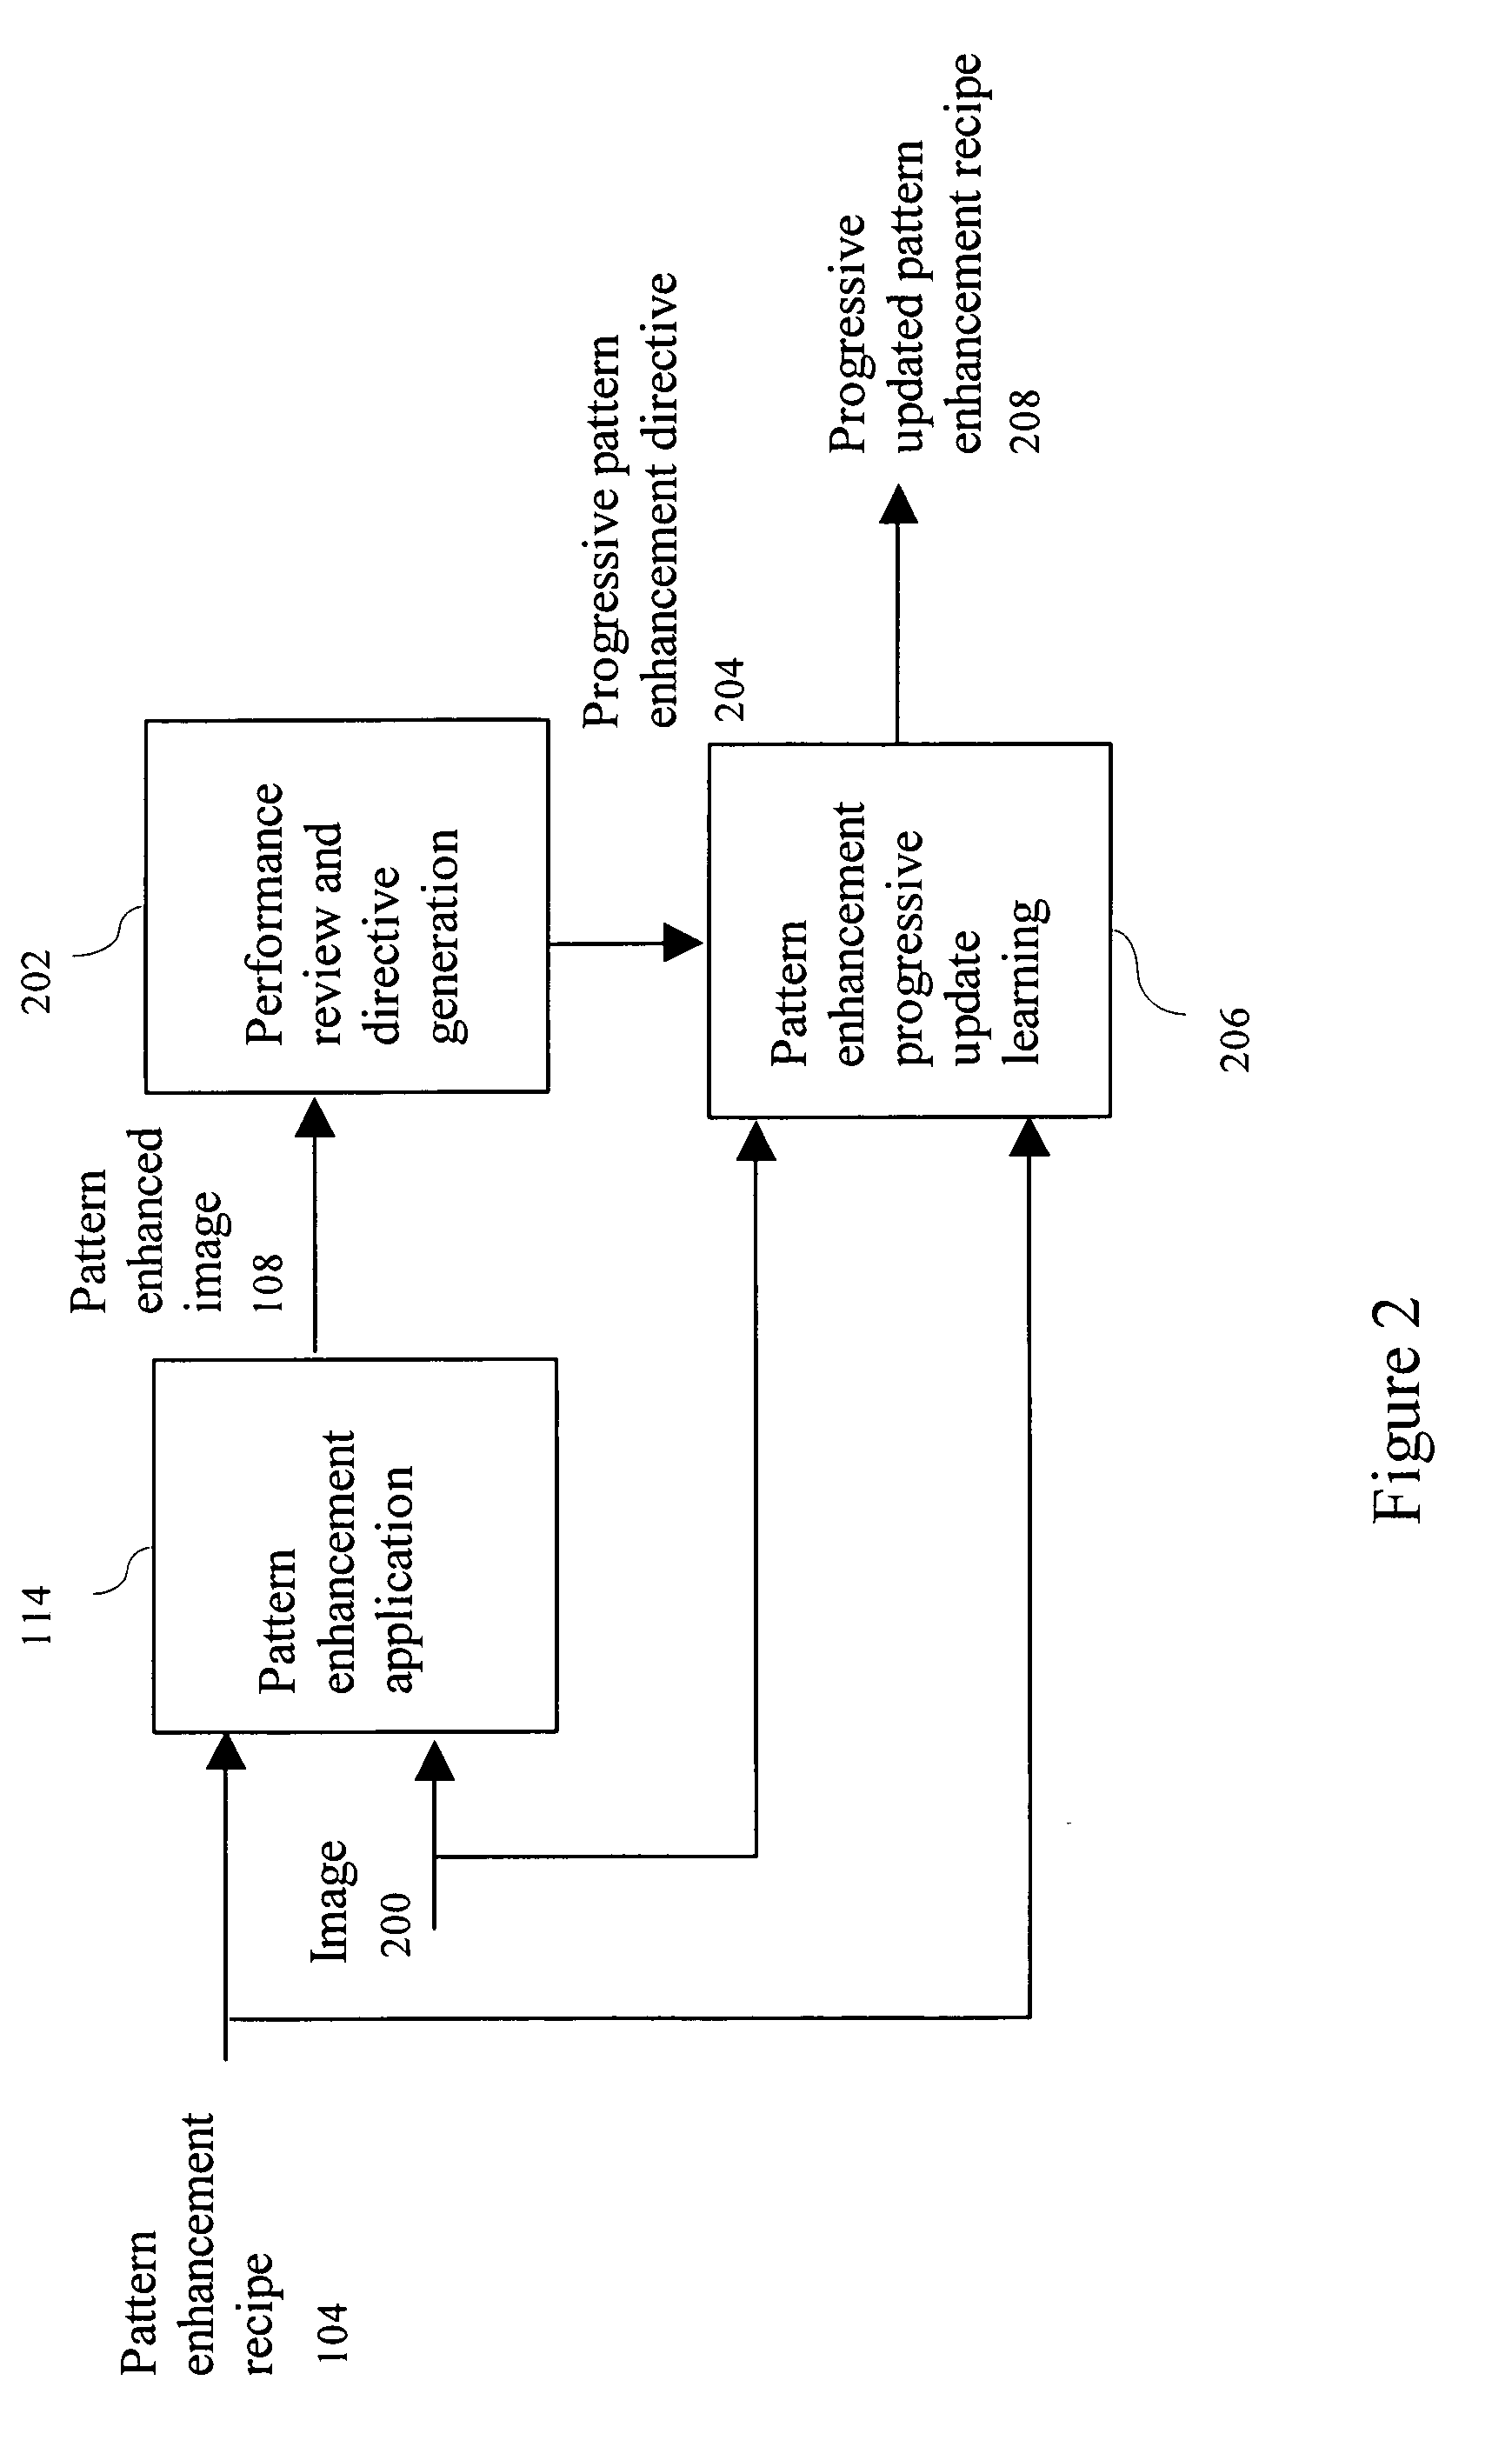 Method of directed pattern enhancement for flexible recognition